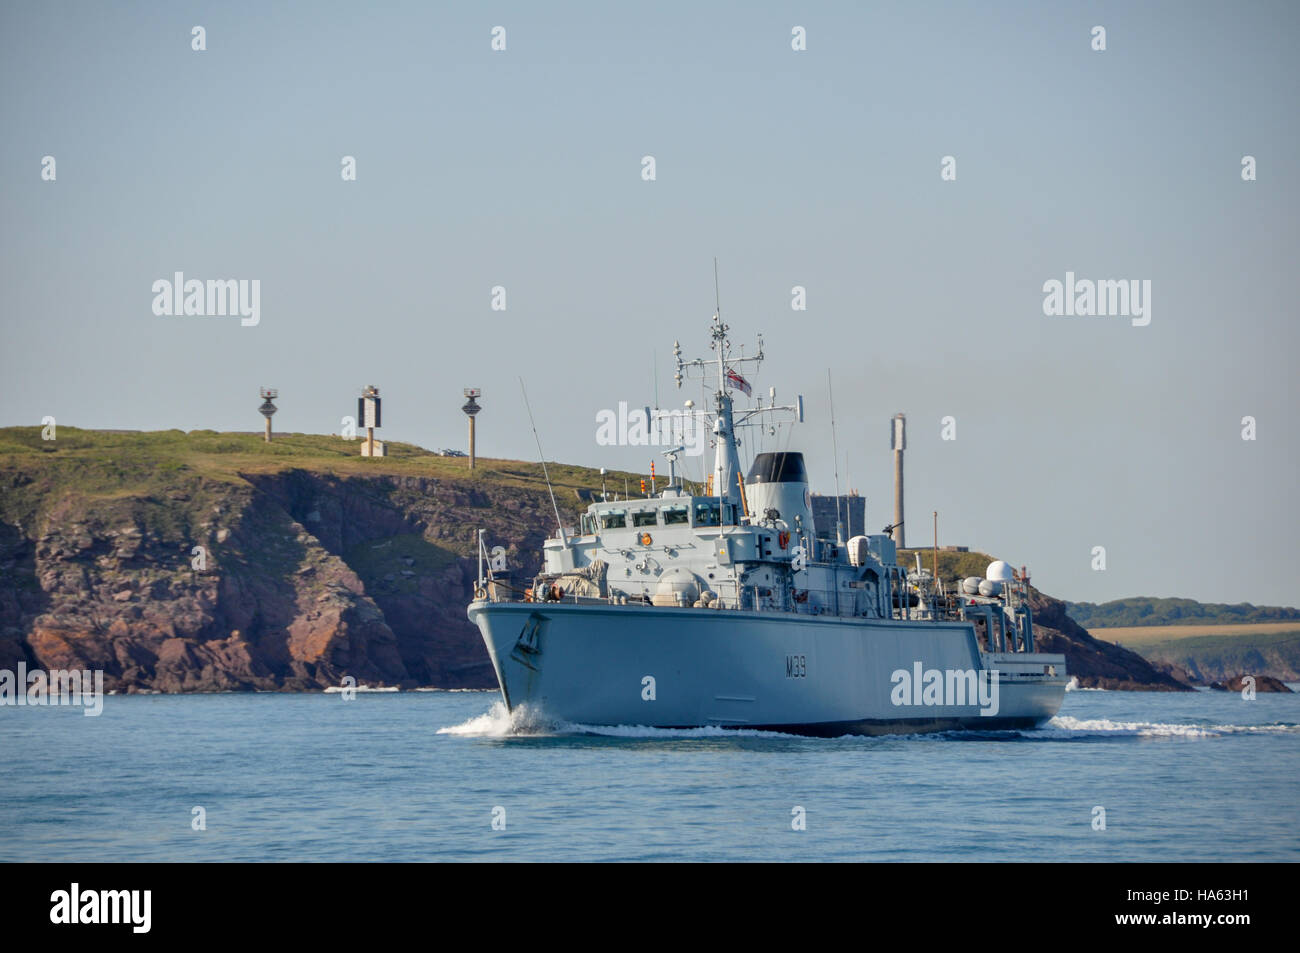 HMS Hurworth executing a high speed turn within Milford Haven, Pembrokeshire, on a calm summers day Stock Photo